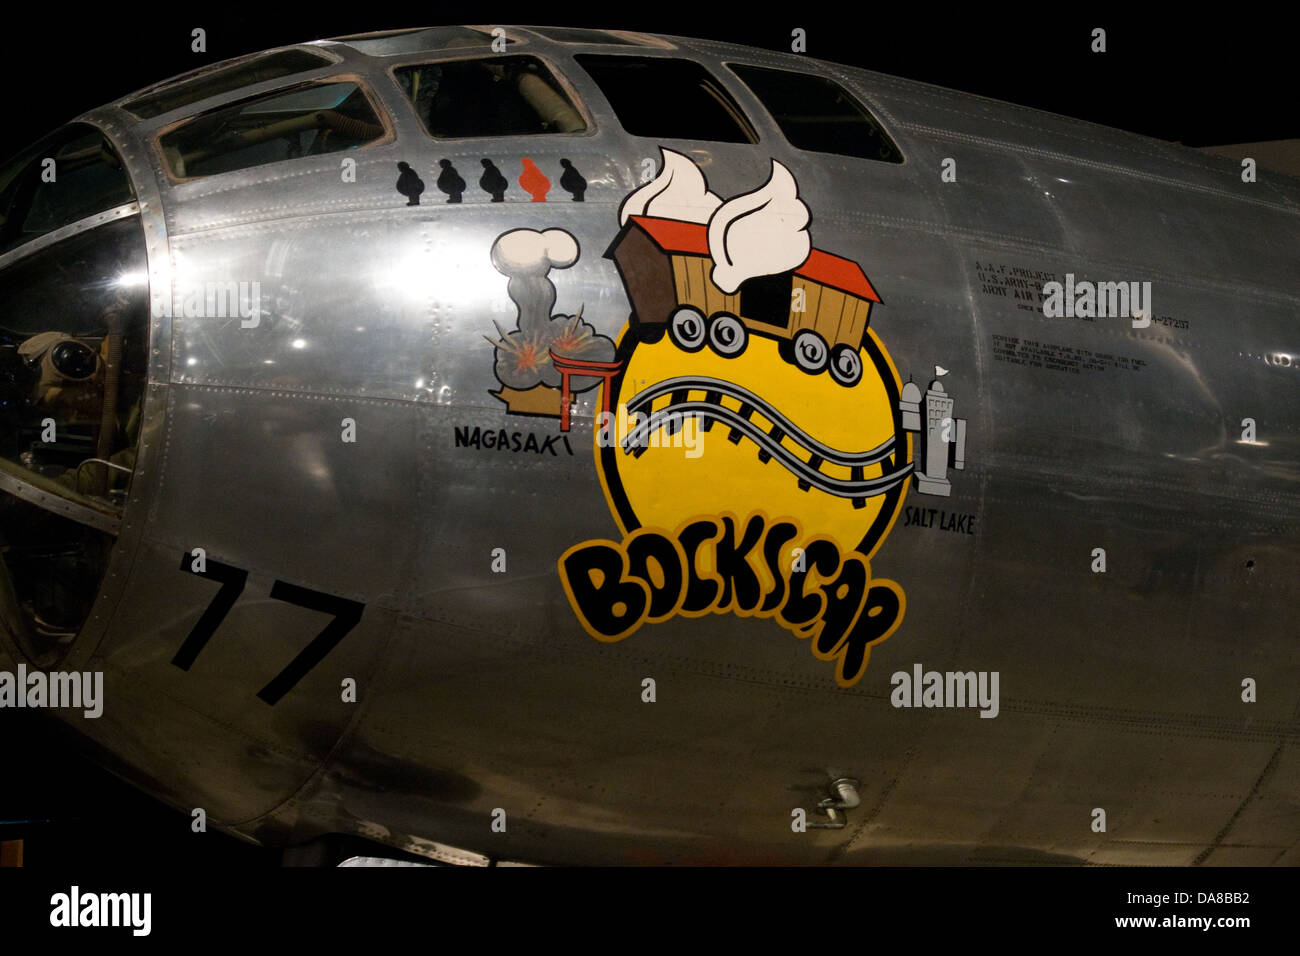 Nose art of Bocks Car B29 Superfortress Atomic Bomber at the USAF museum Wright-Patterson Air Force Base Dayton Ohio OH USA Stock Photo